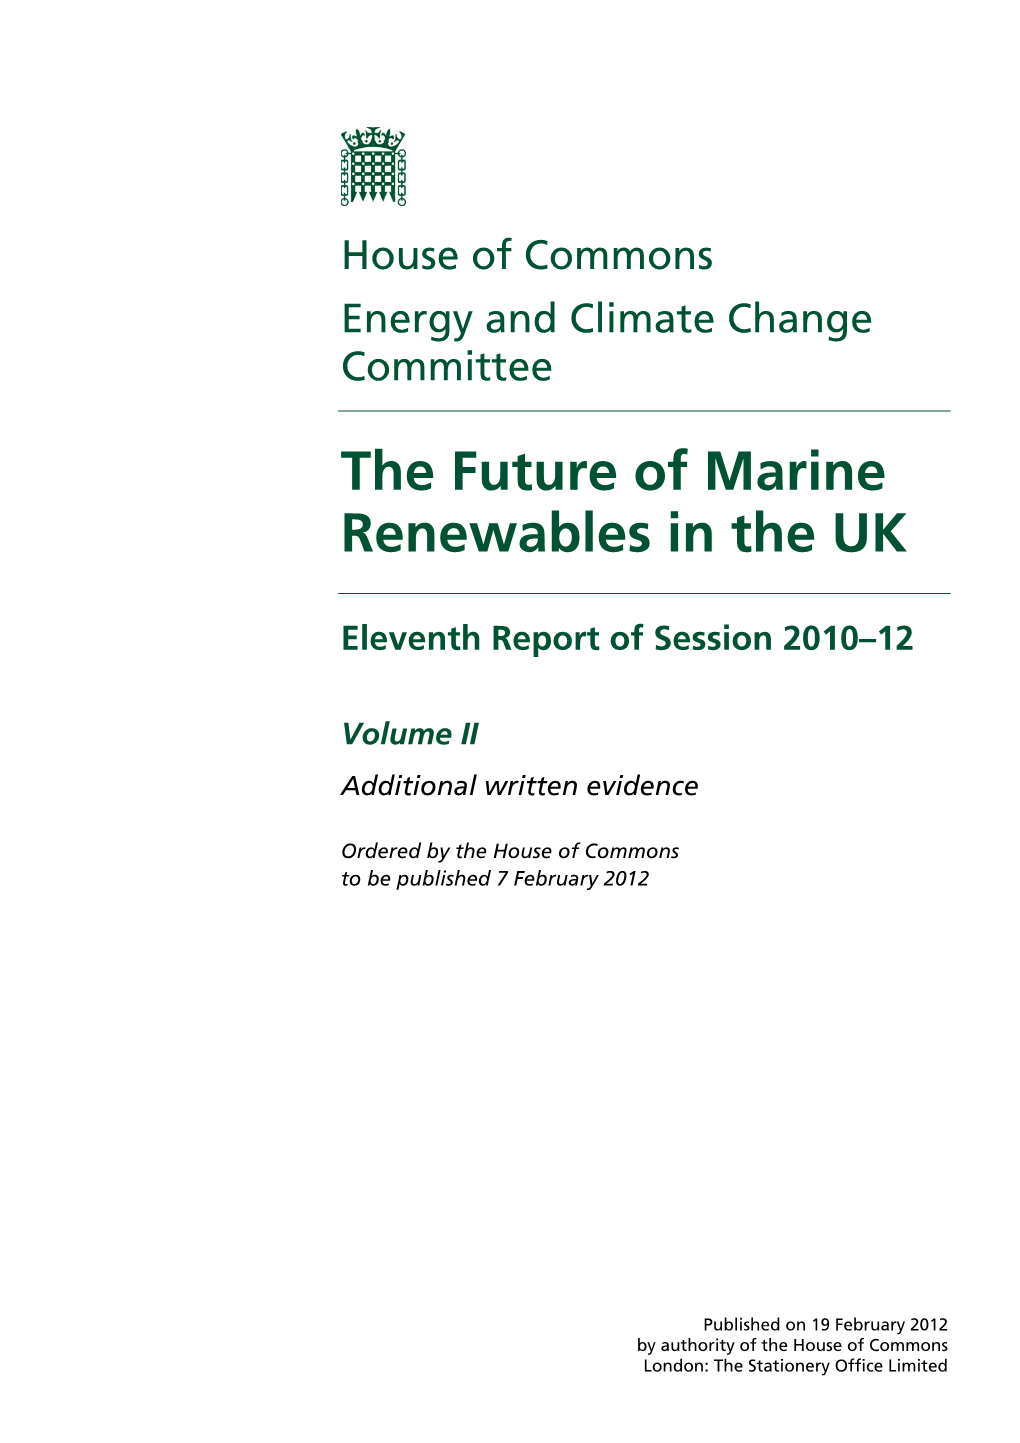 The Future of Marine Renewables in the UK